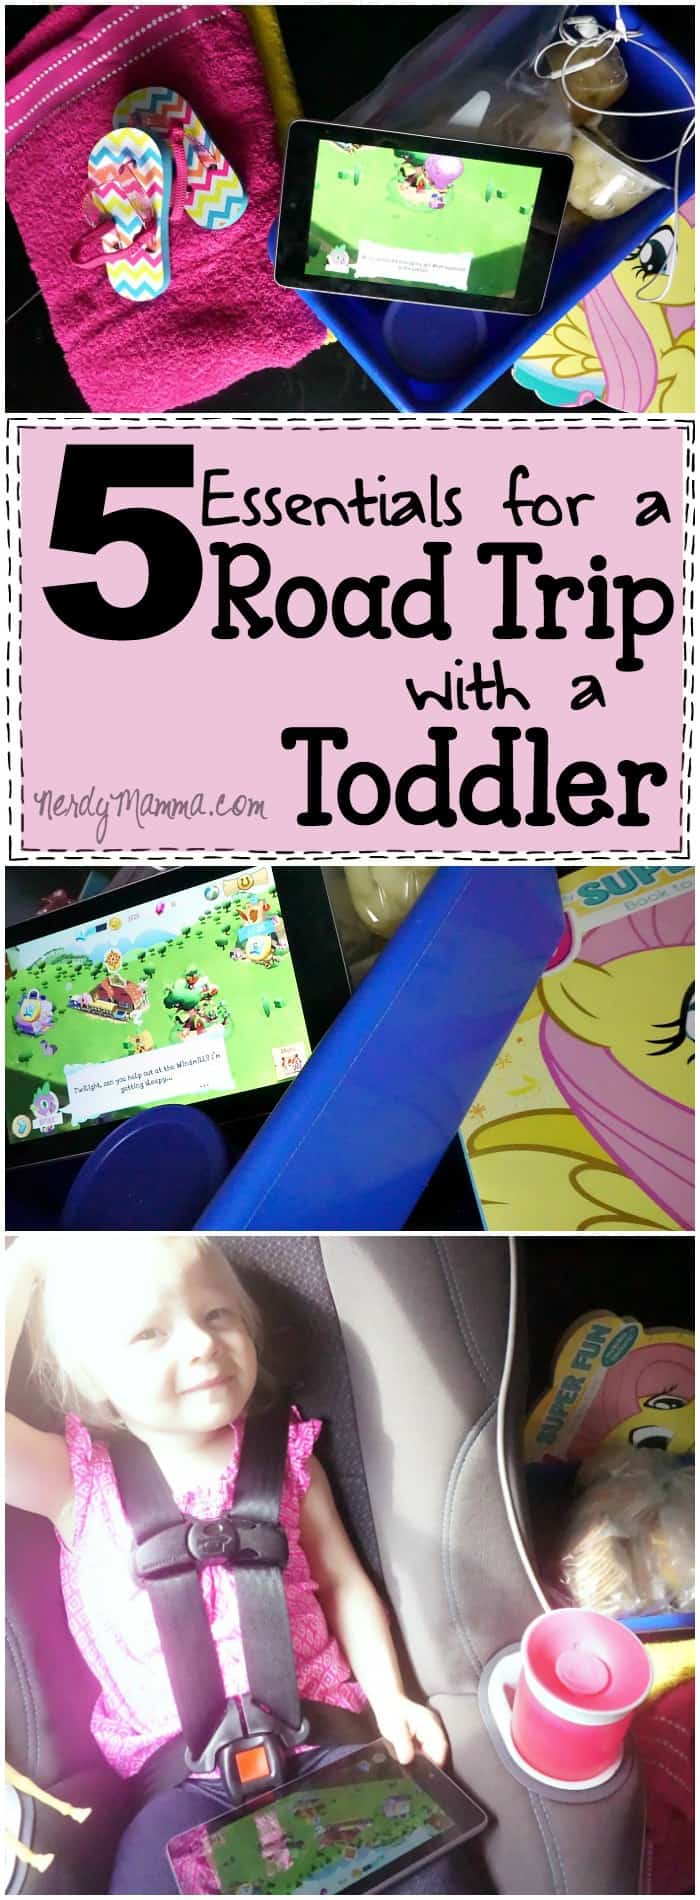 This mom has some GREAT ideas on what to bring for a road trip with a toddler! So simple...wish I'd known about this a long time ago...